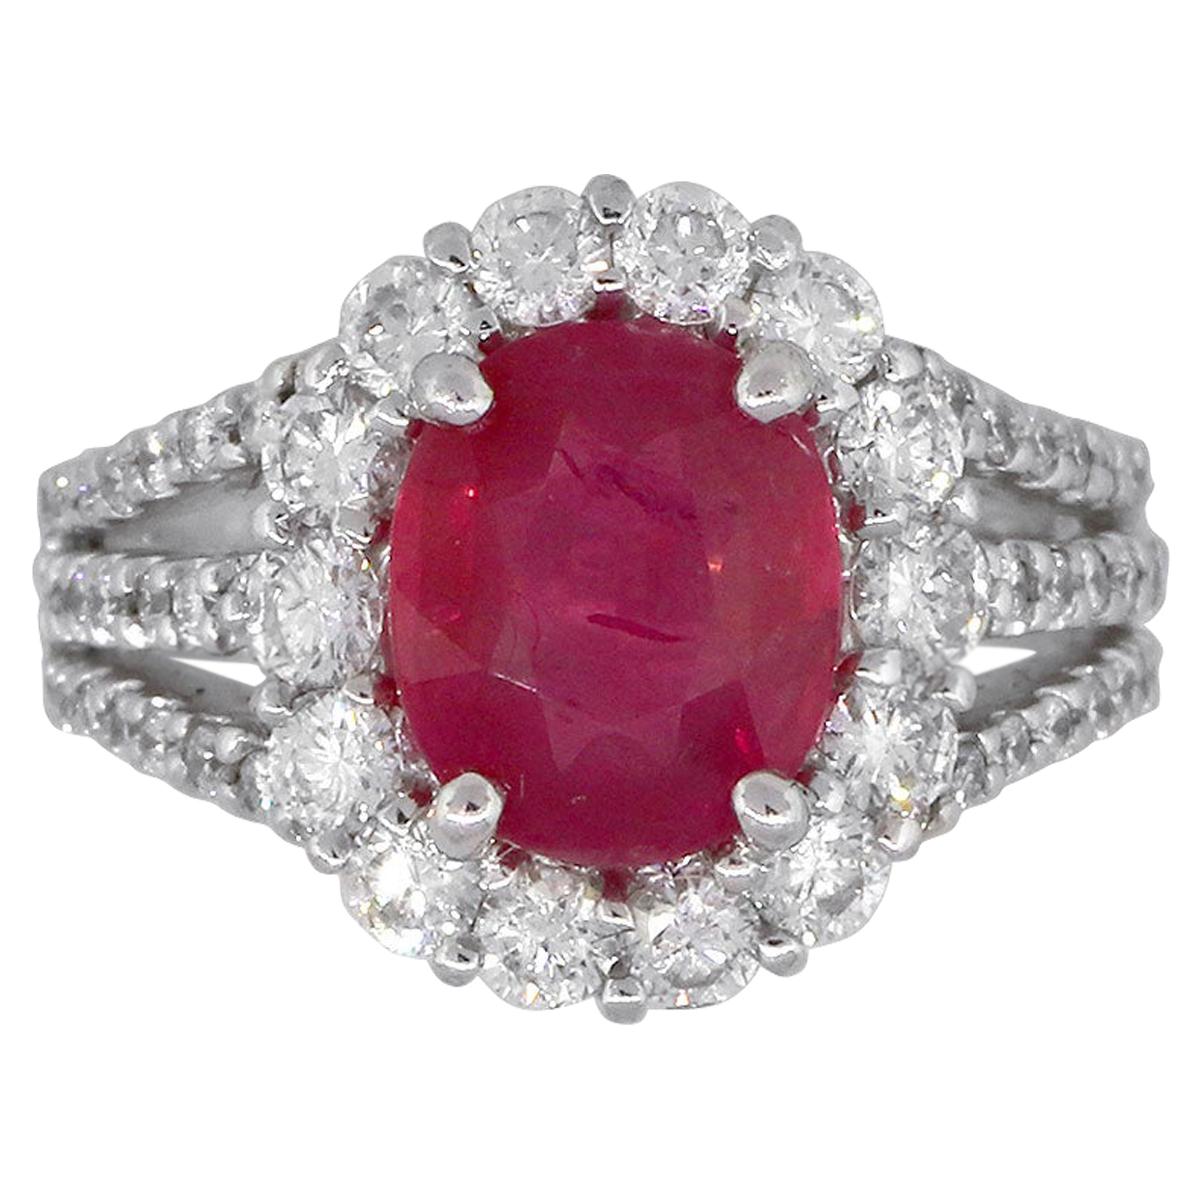 Oval Cut Ruby Ring with Diamonds